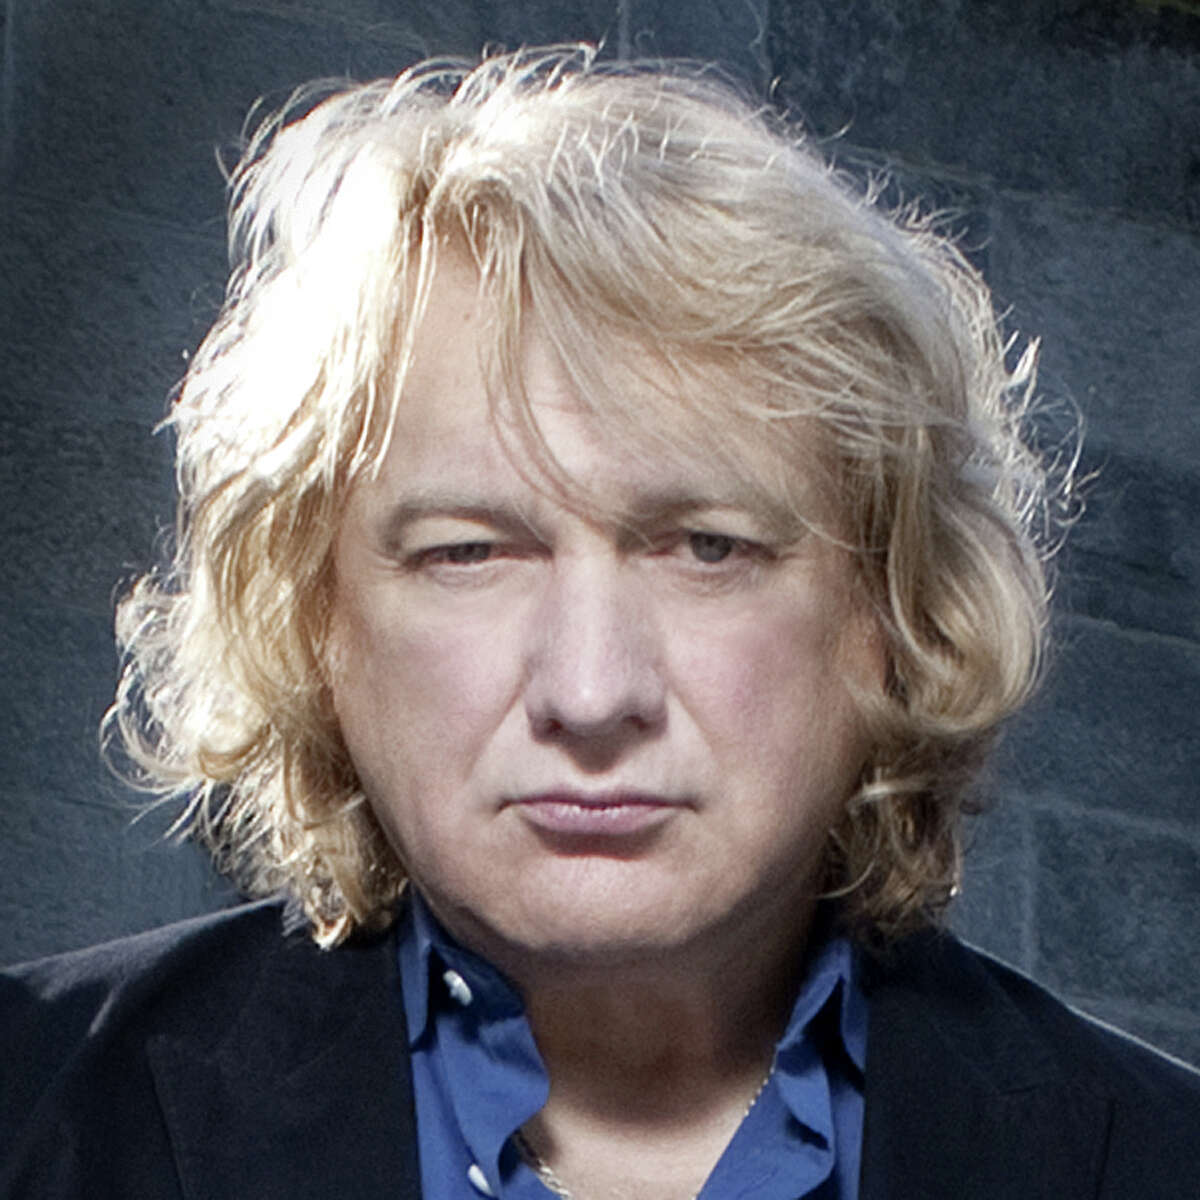 35 years later, Lou Gramm stays true to himself